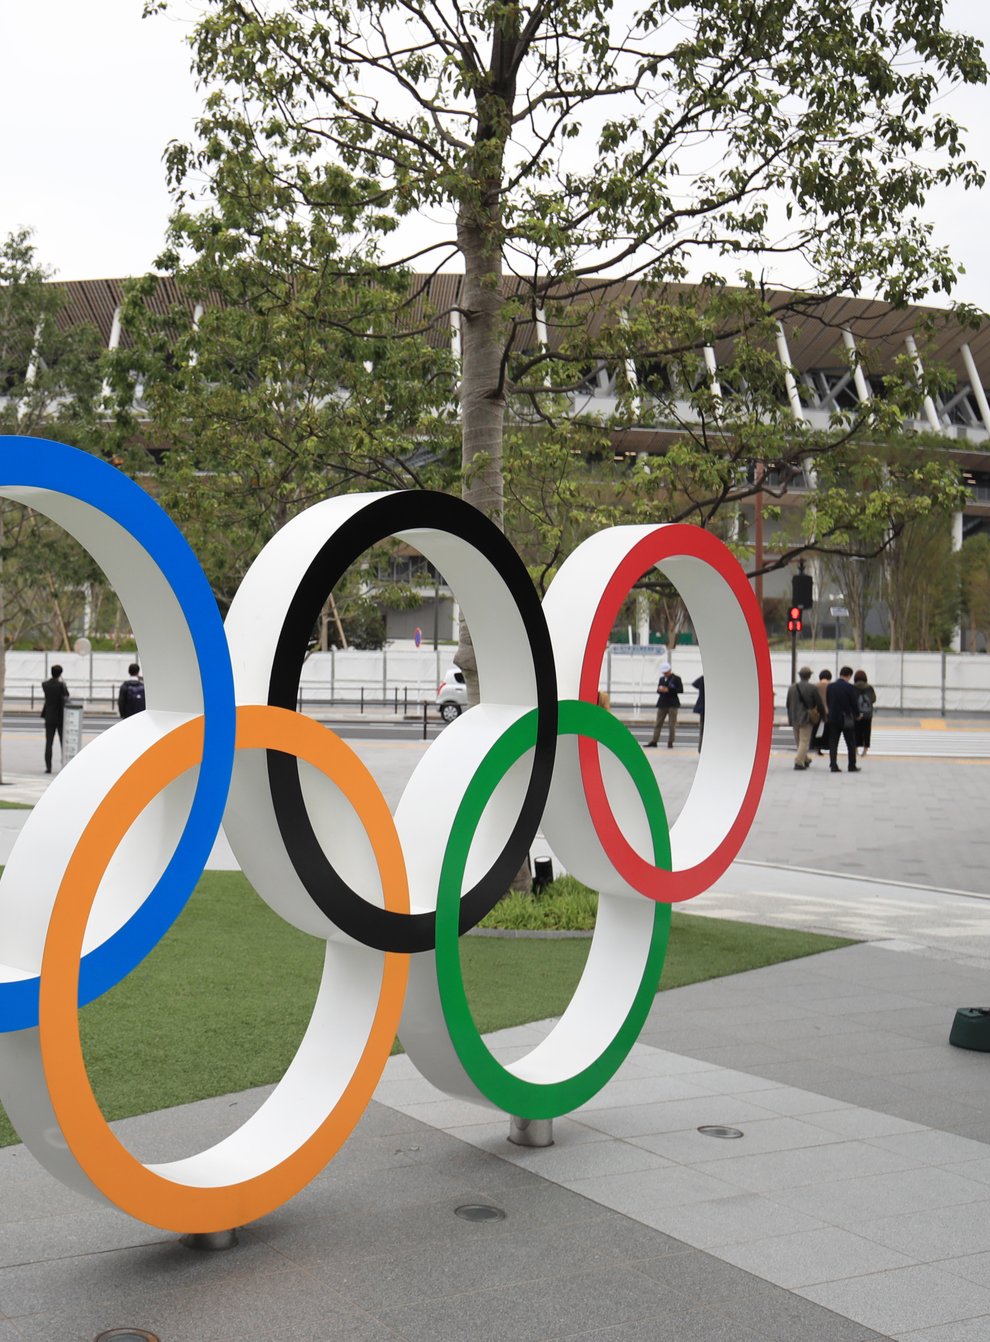 Two athletes have become the first to test positive in the Olympic Village